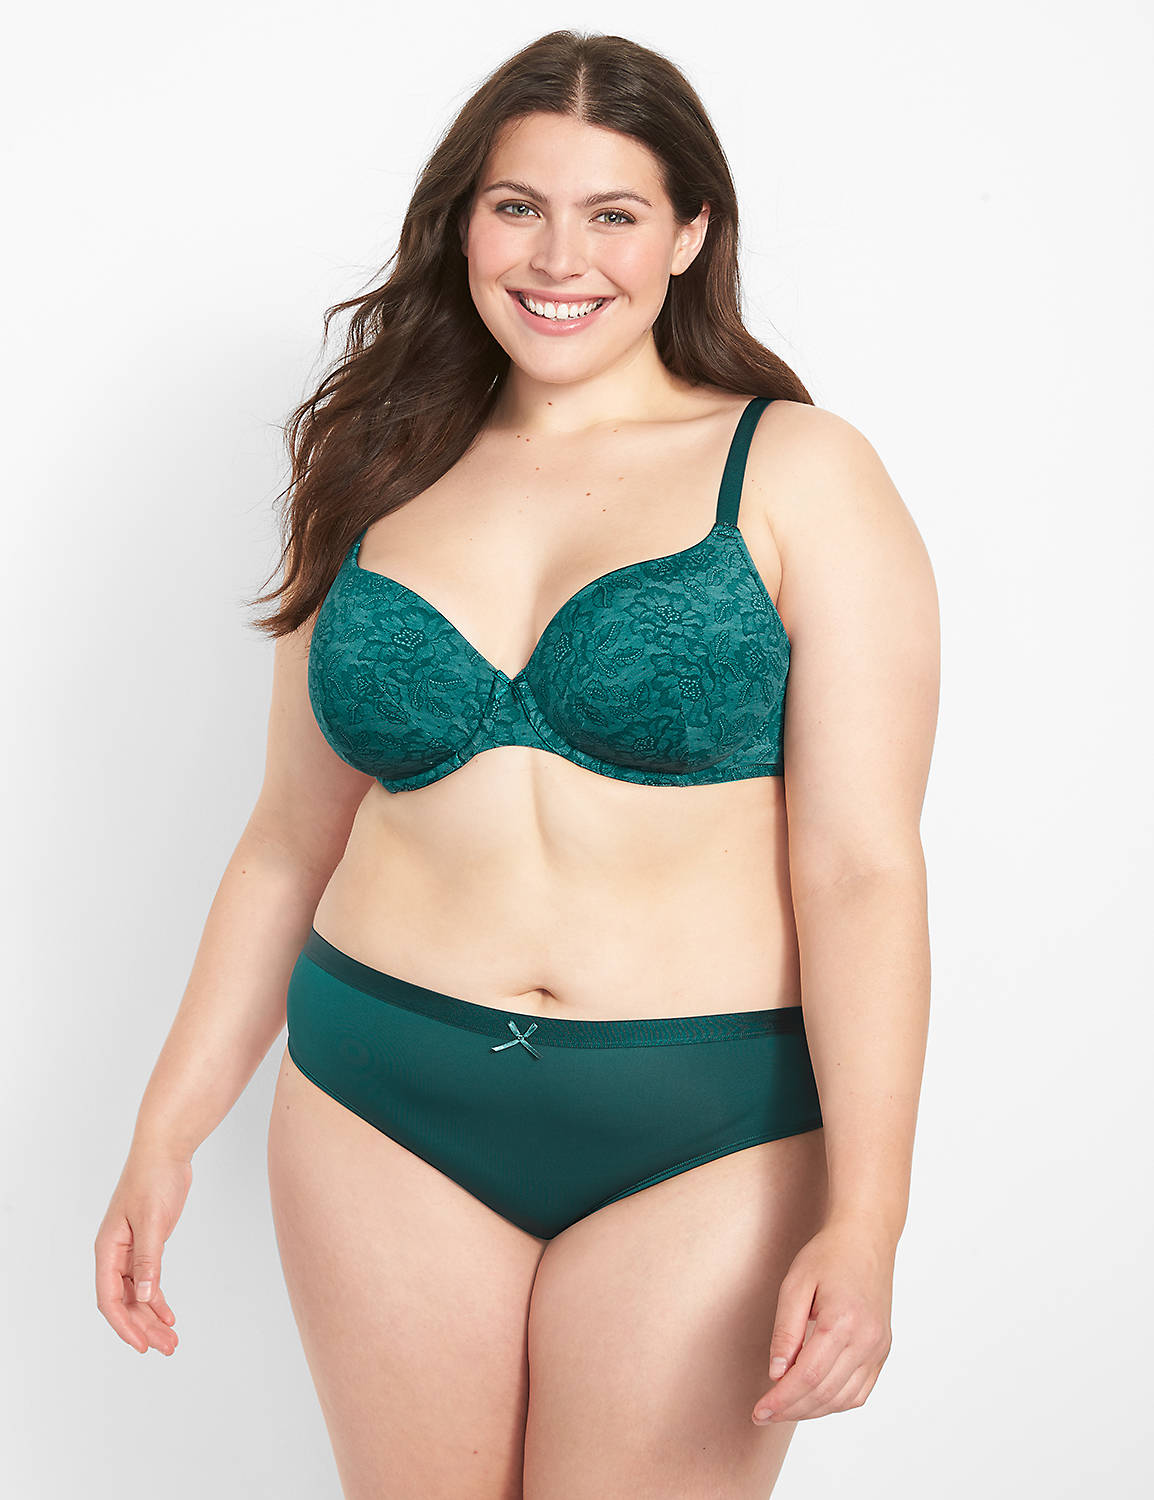 Lane Bryant - Does your bra make you happy? $15 off says ours will! Pop in  store this weekend to enjoy: 💕 $15 off Cacique bras – all weekend long! 💕  A